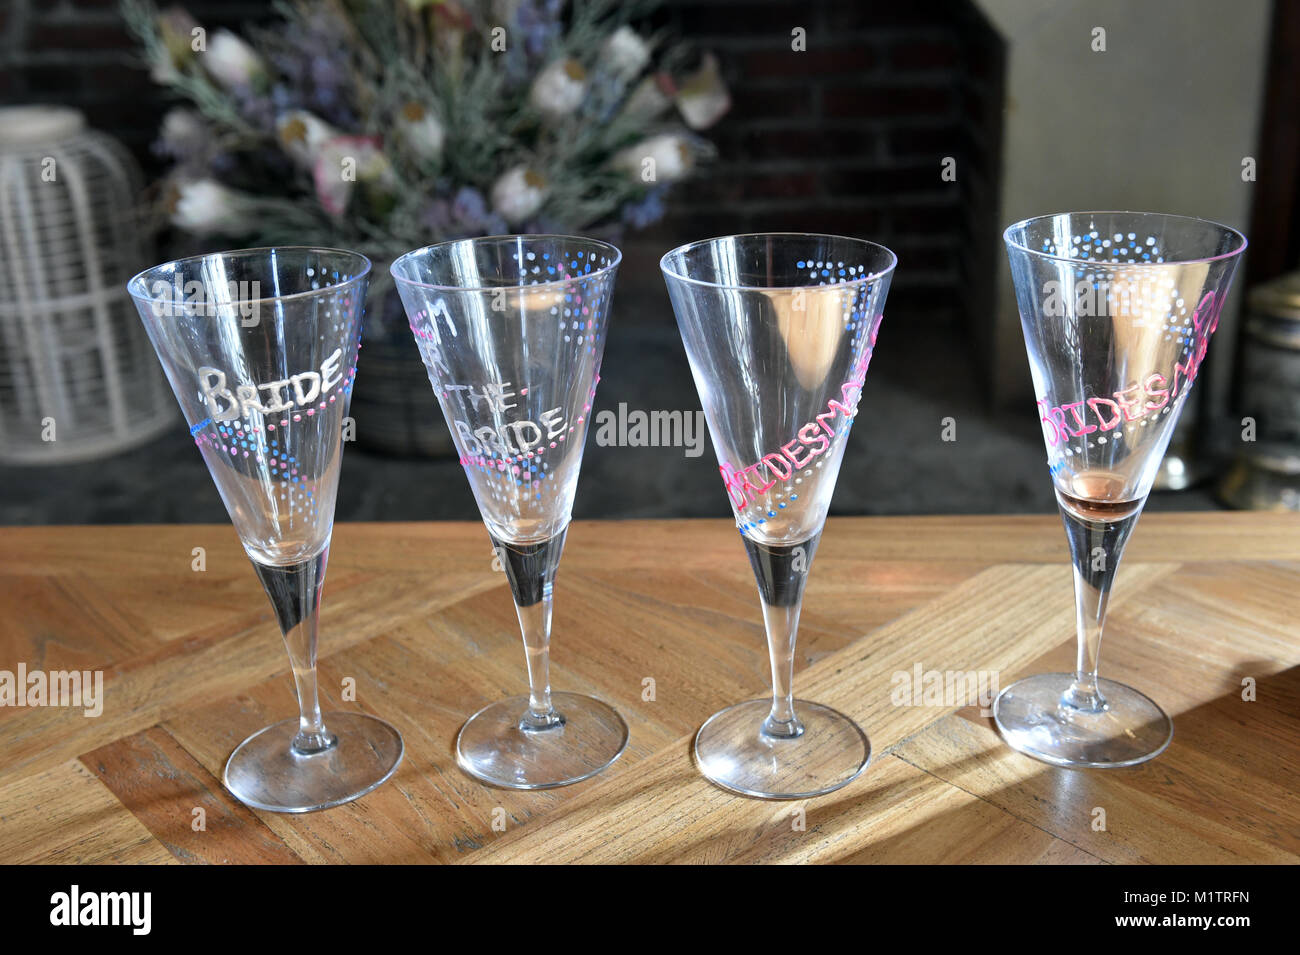 Special glasses for bride and bridesmaids getting ready for the wedding Stock Photo